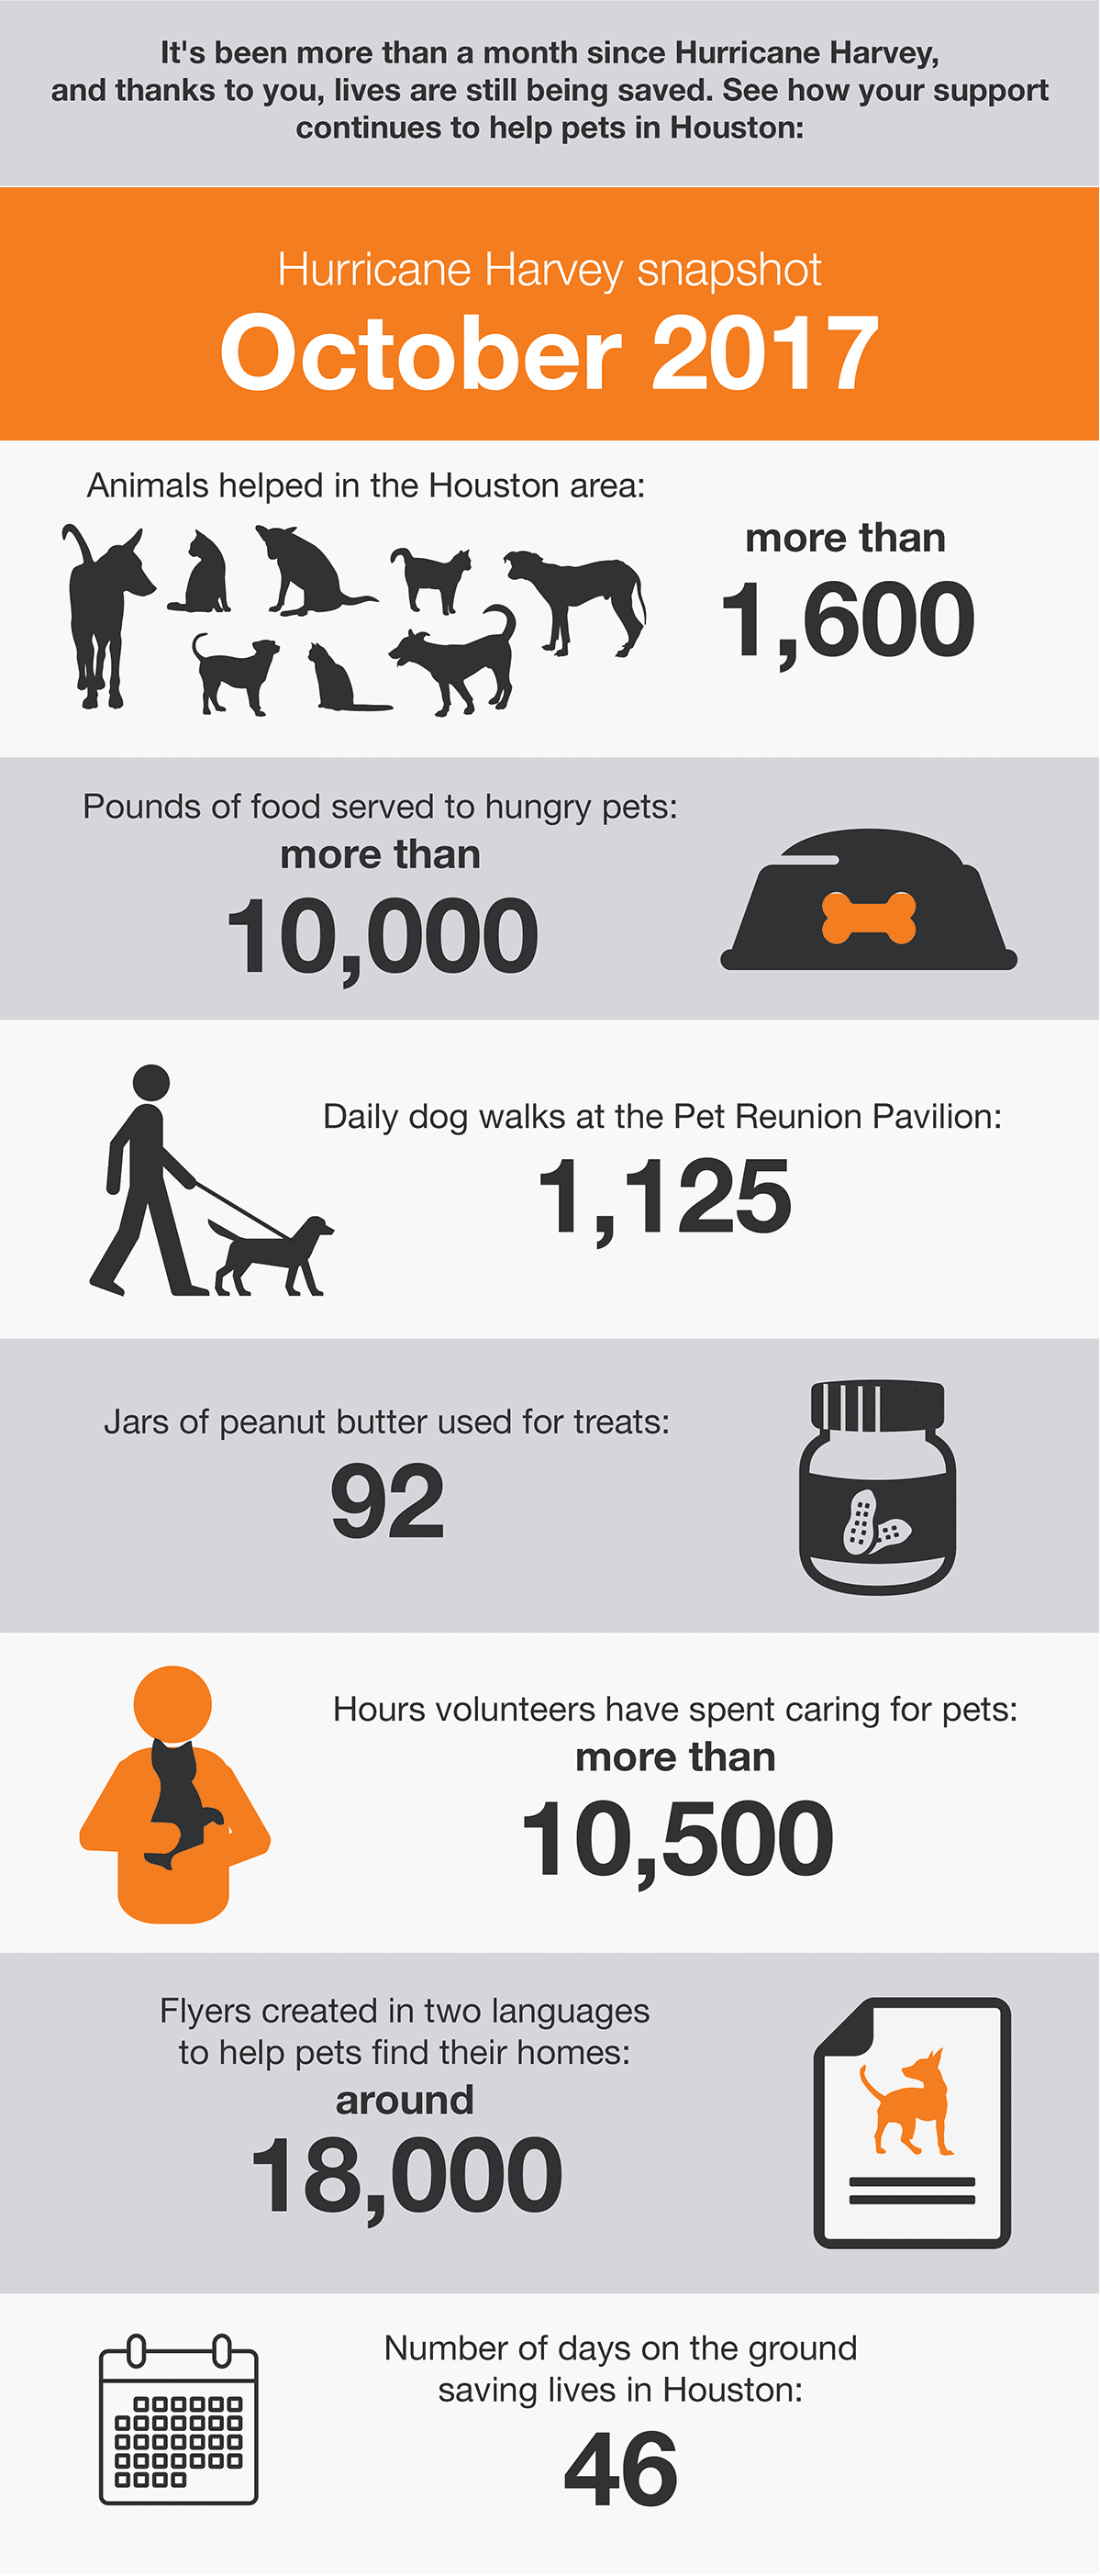 It’s been more than a month since Hurricane Harvey, and thanks to you, lives are still being saved. See how your support continues to help pets in Houston:

Hurricane Harvey snapshot  October 2017

Animals helped in the Houston area: more than 1600

Pounds of food served to hungry pets: more than 10,000

Daily dog walks at the Pet Reunion Pavilion: 1,125

Jars of peanut butter used for treats: 92

Hours volunteers have spent caring for pets: more than 10,500

Flyers created in two languages to help pets find their hoes: around 18,000

Number of days on the ground saving lives in Houston: 46
